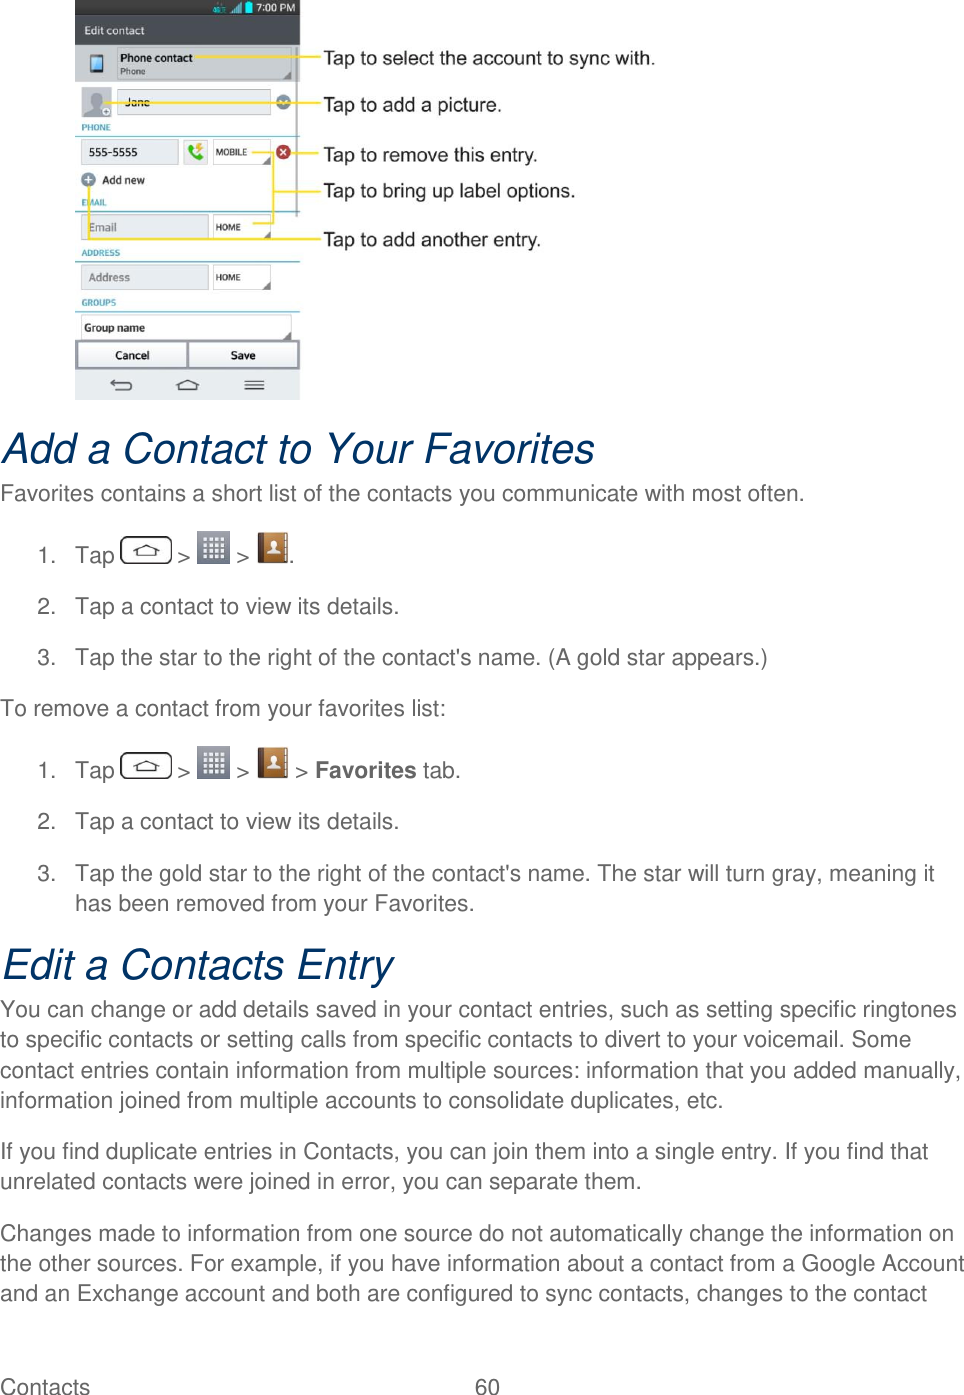  Contacts  60    Add a Contact to Your Favorites Favorites contains a short list of the contacts you communicate with most often. 1.  Tap   &gt;   &gt;  . 2.  Tap a contact to view its details. 3.  Tap the star to the right of the contact&apos;s name. (A gold star appears.) To remove a contact from your favorites list: 1.  Tap   &gt;   &gt;   &gt; Favorites tab. 2.  Tap a contact to view its details. 3.  Tap the gold star to the right of the contact&apos;s name. The star will turn gray, meaning it has been removed from your Favorites. Edit a Contacts Entry You can change or add details saved in your contact entries, such as setting specific ringtones to specific contacts or setting calls from specific contacts to divert to your voicemail. Some contact entries contain information from multiple sources: information that you added manually, information joined from multiple accounts to consolidate duplicates, etc. If you find duplicate entries in Contacts, you can join them into a single entry. If you find that unrelated contacts were joined in error, you can separate them. Changes made to information from one source do not automatically change the information on the other sources. For example, if you have information about a contact from a Google Account and an Exchange account and both are configured to sync contacts, changes to the contact 